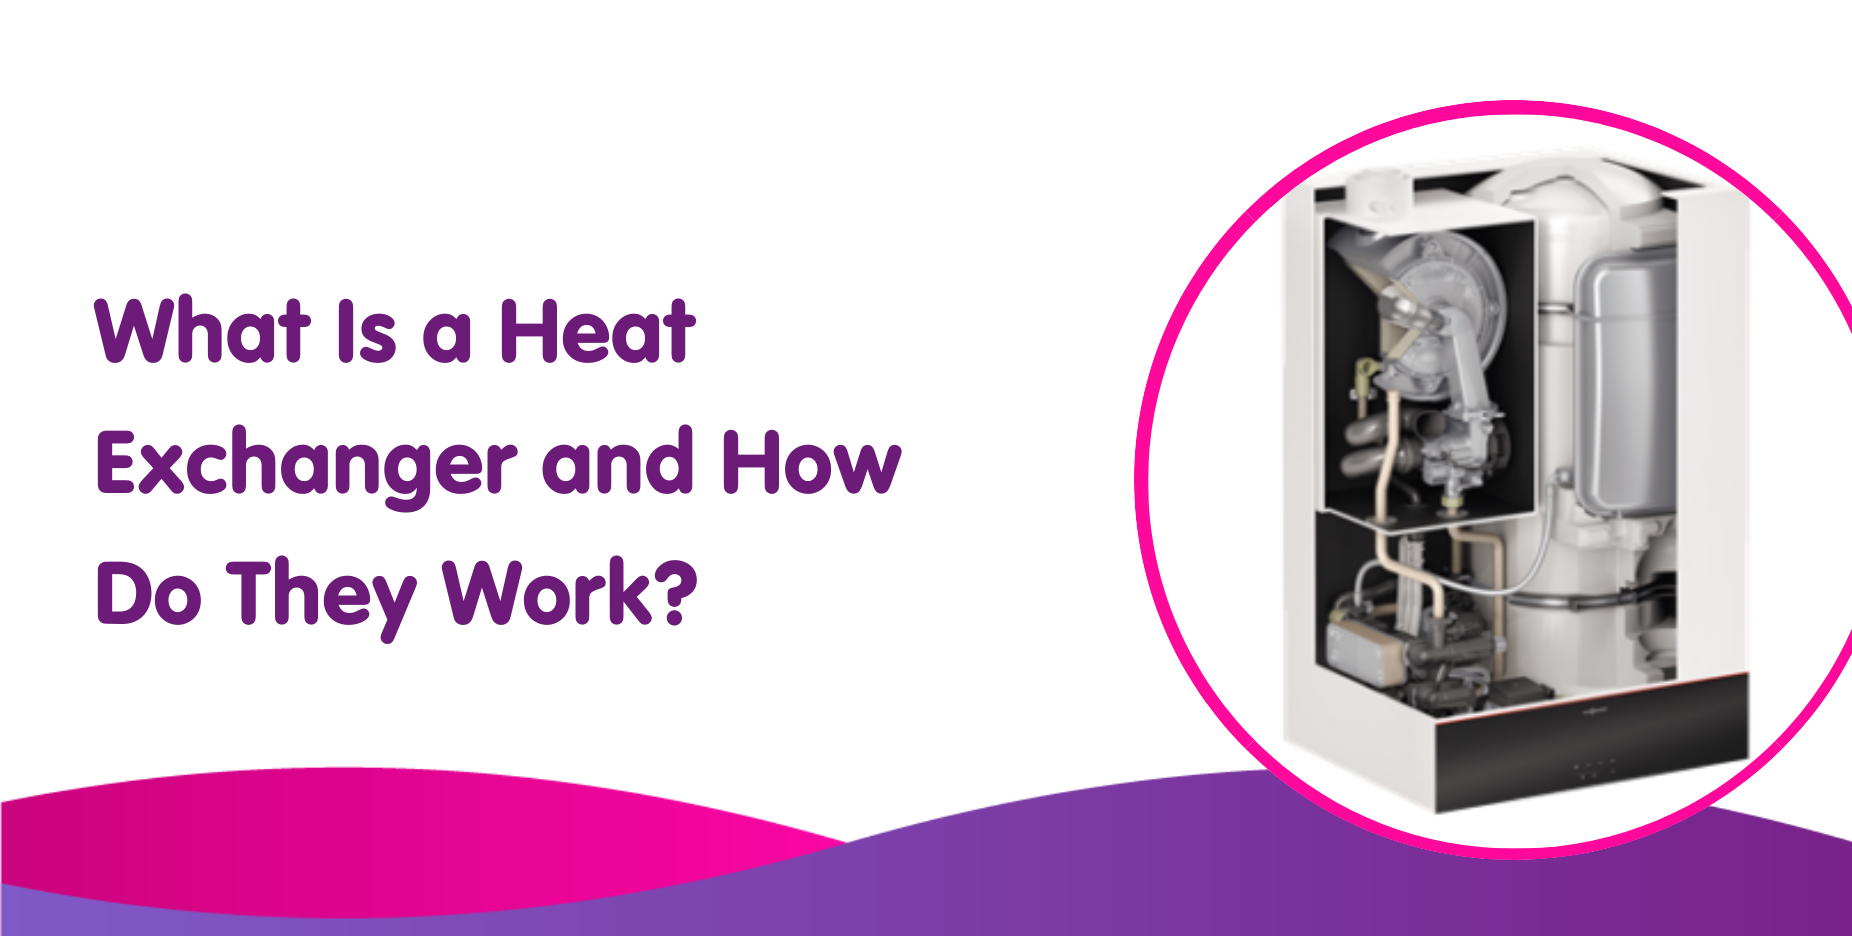 What Is a Heat Exchanger in a Boiler and How Do They Work?